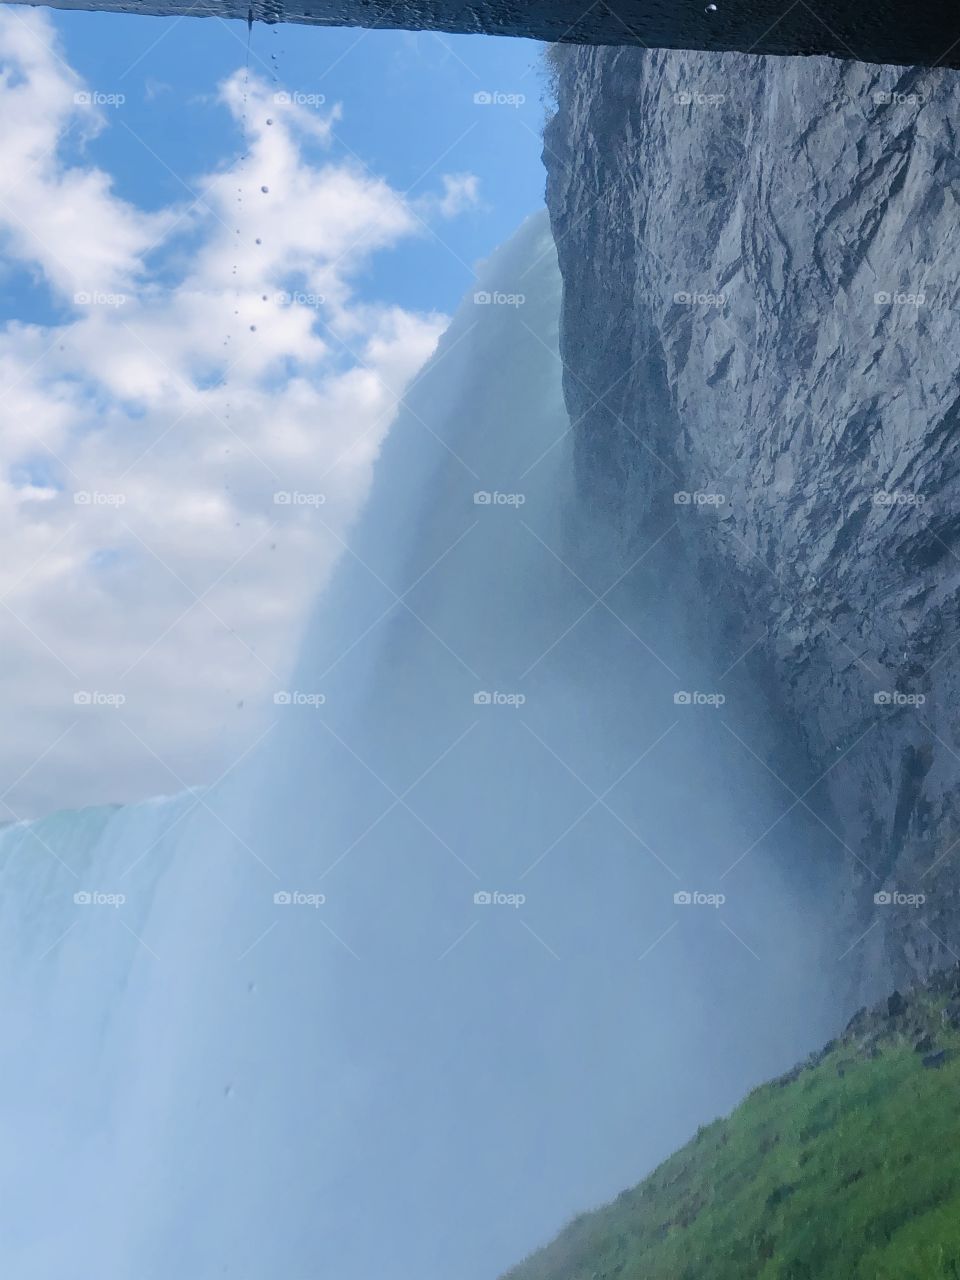 Viewing waterfalls from every angle possible